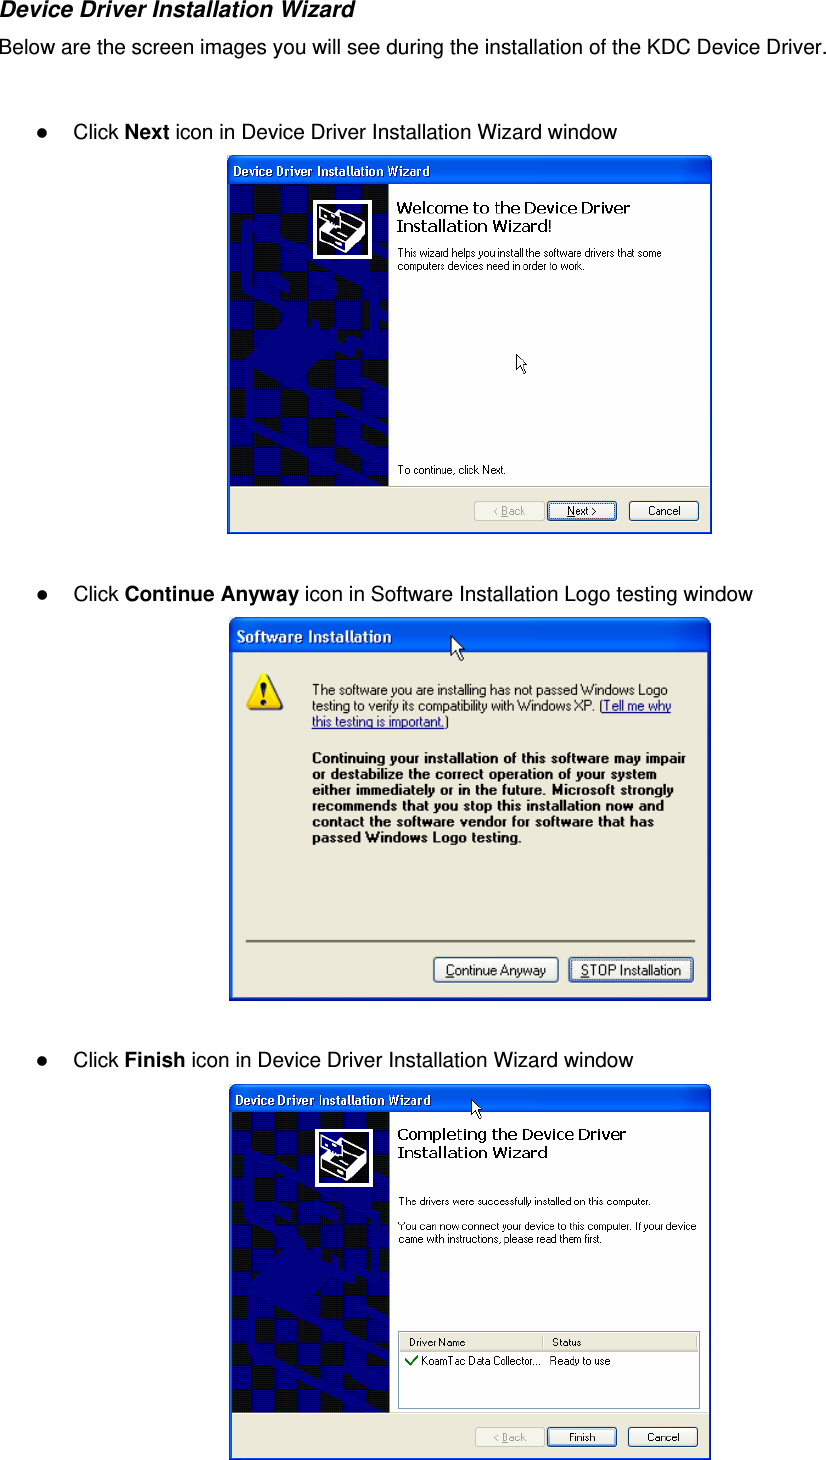 Device Driver Installation Wizard Below are the screen images you will see during the installation of the KDC Device Driver.     Click Next icon in Device Driver Installation Wizard window    Click Continue Anyway icon in Software Installation Logo testing window    Click Finish icon in Device Driver Installation Wizard window   